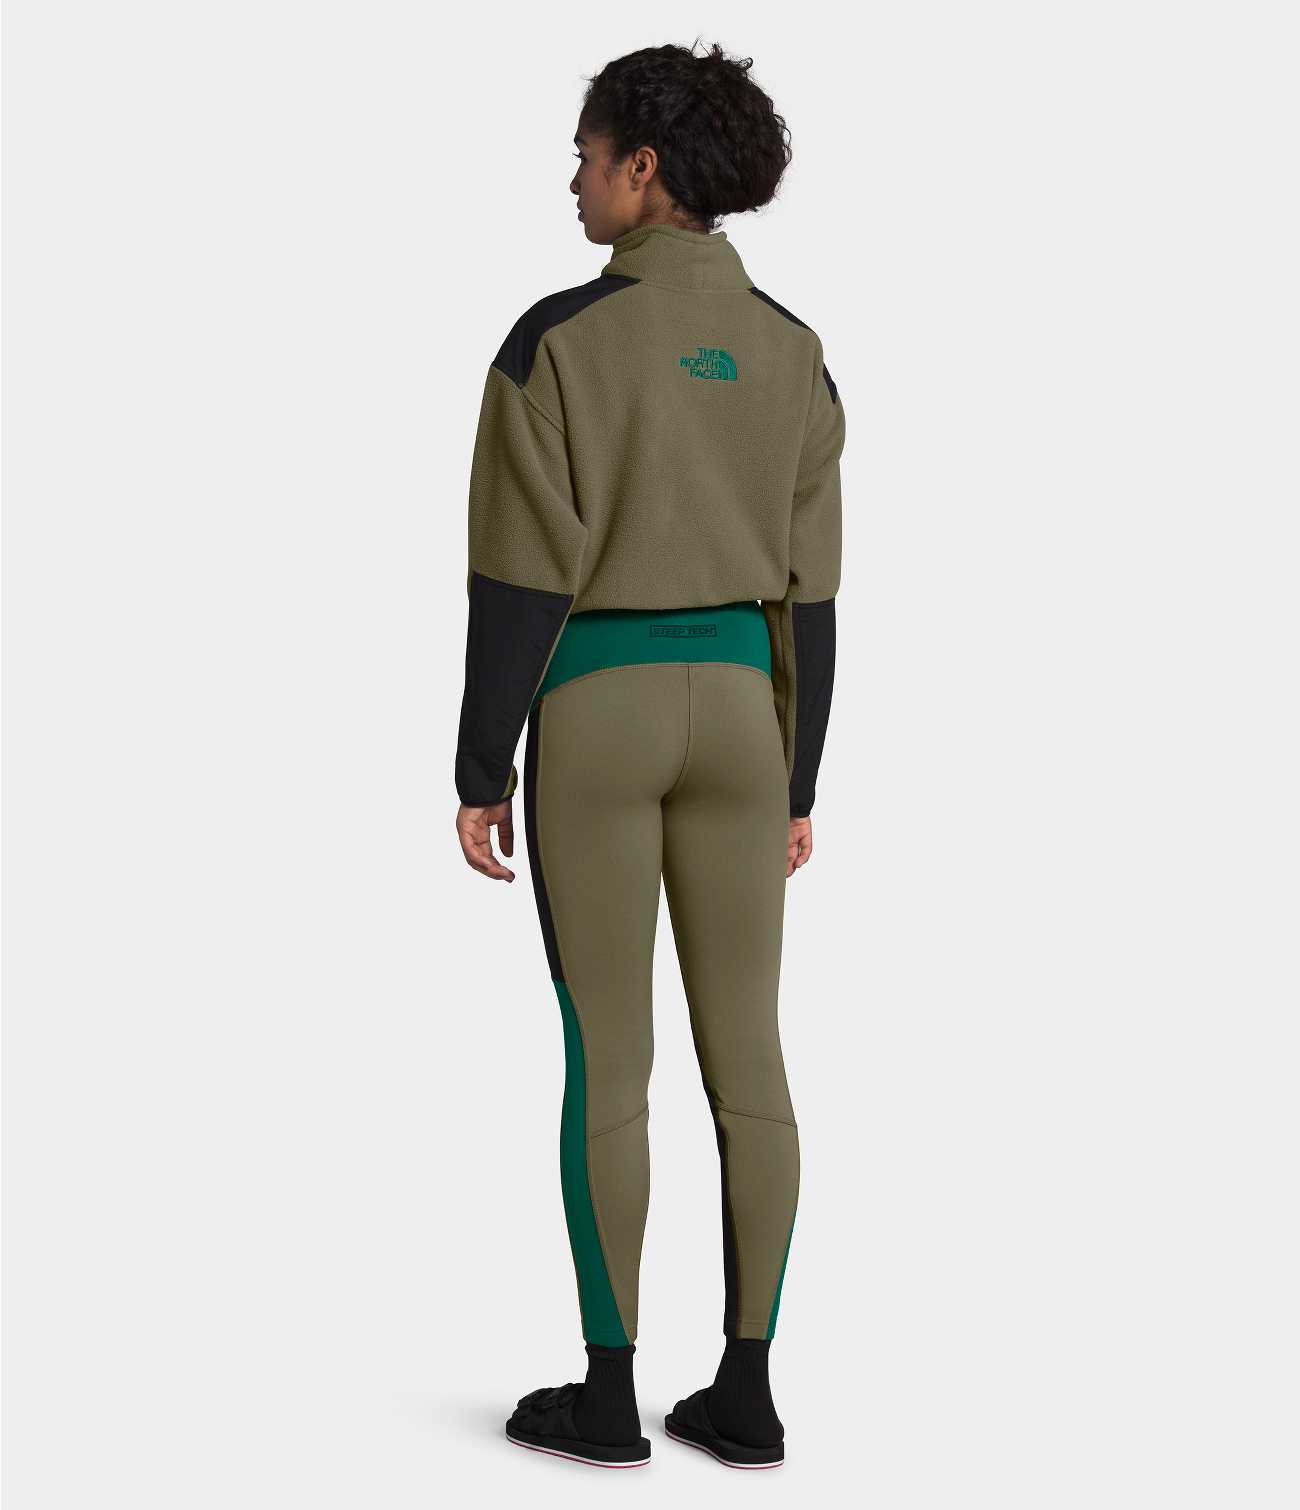 The North Face Printed Never Stop Tights Girls